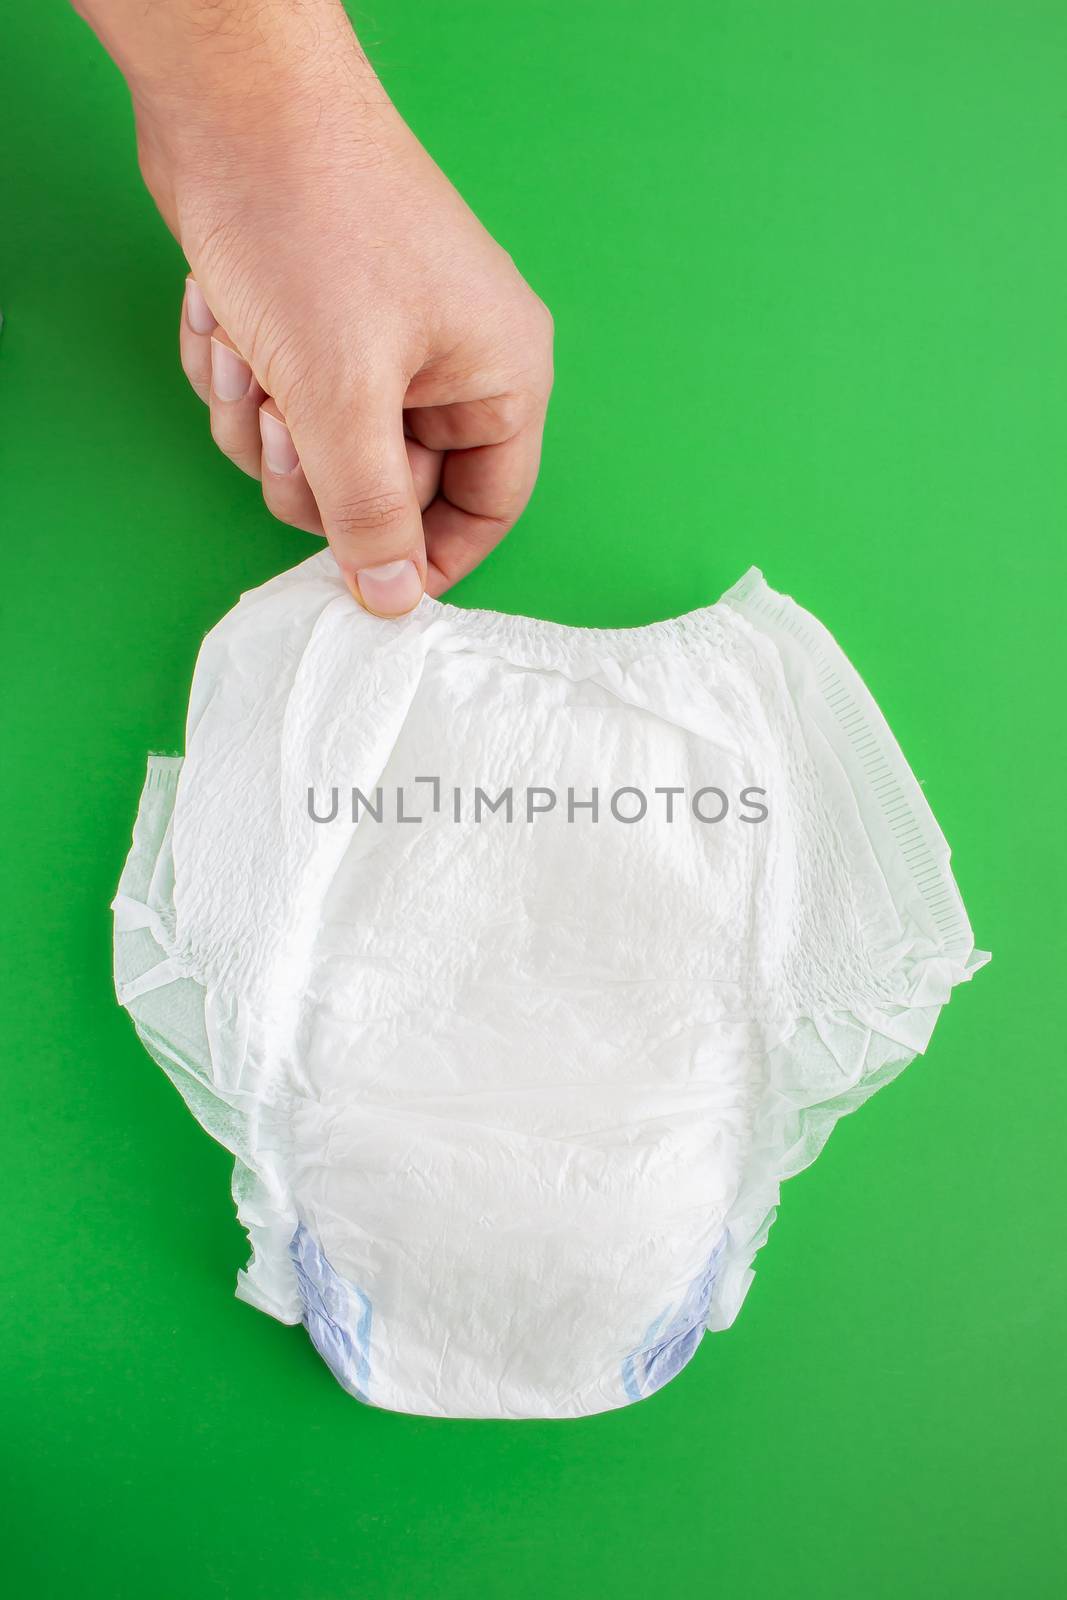 A person holding a diaper on a green background